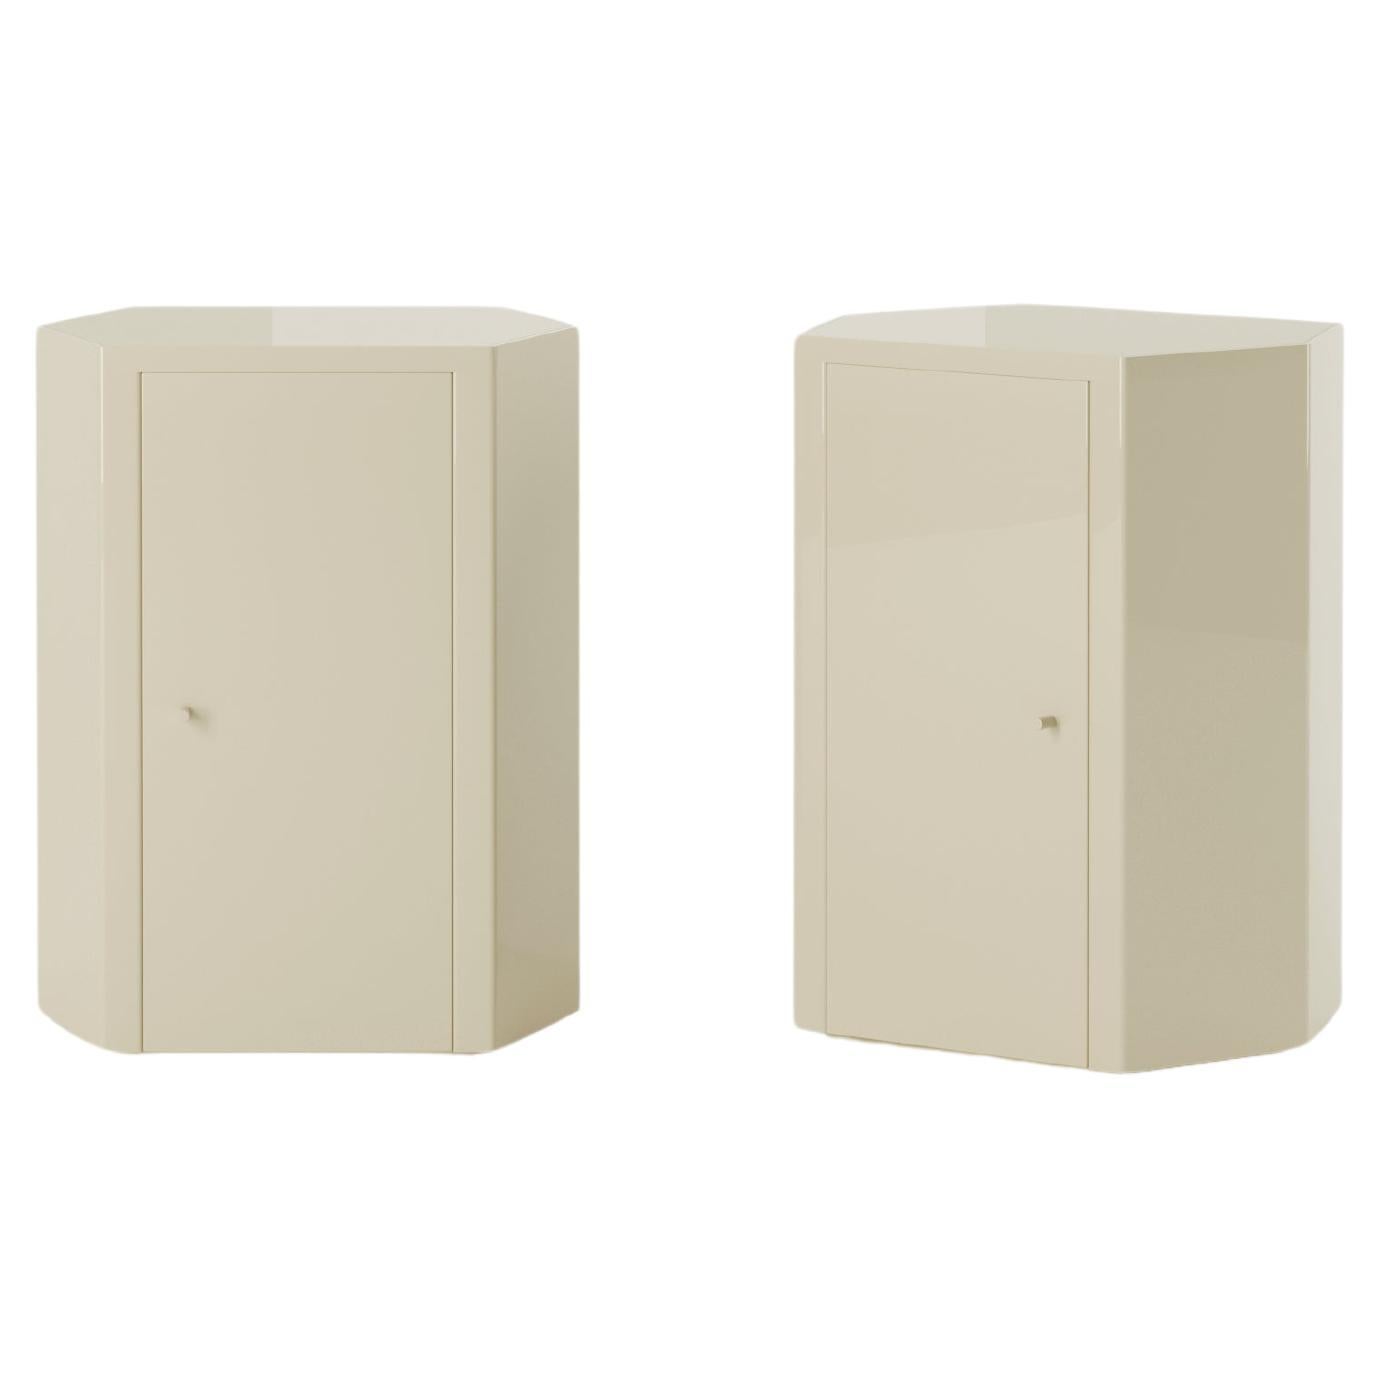 Pair of Park Night Stands in Butter Cream Lacquer by Yaniv Chen for Lemon